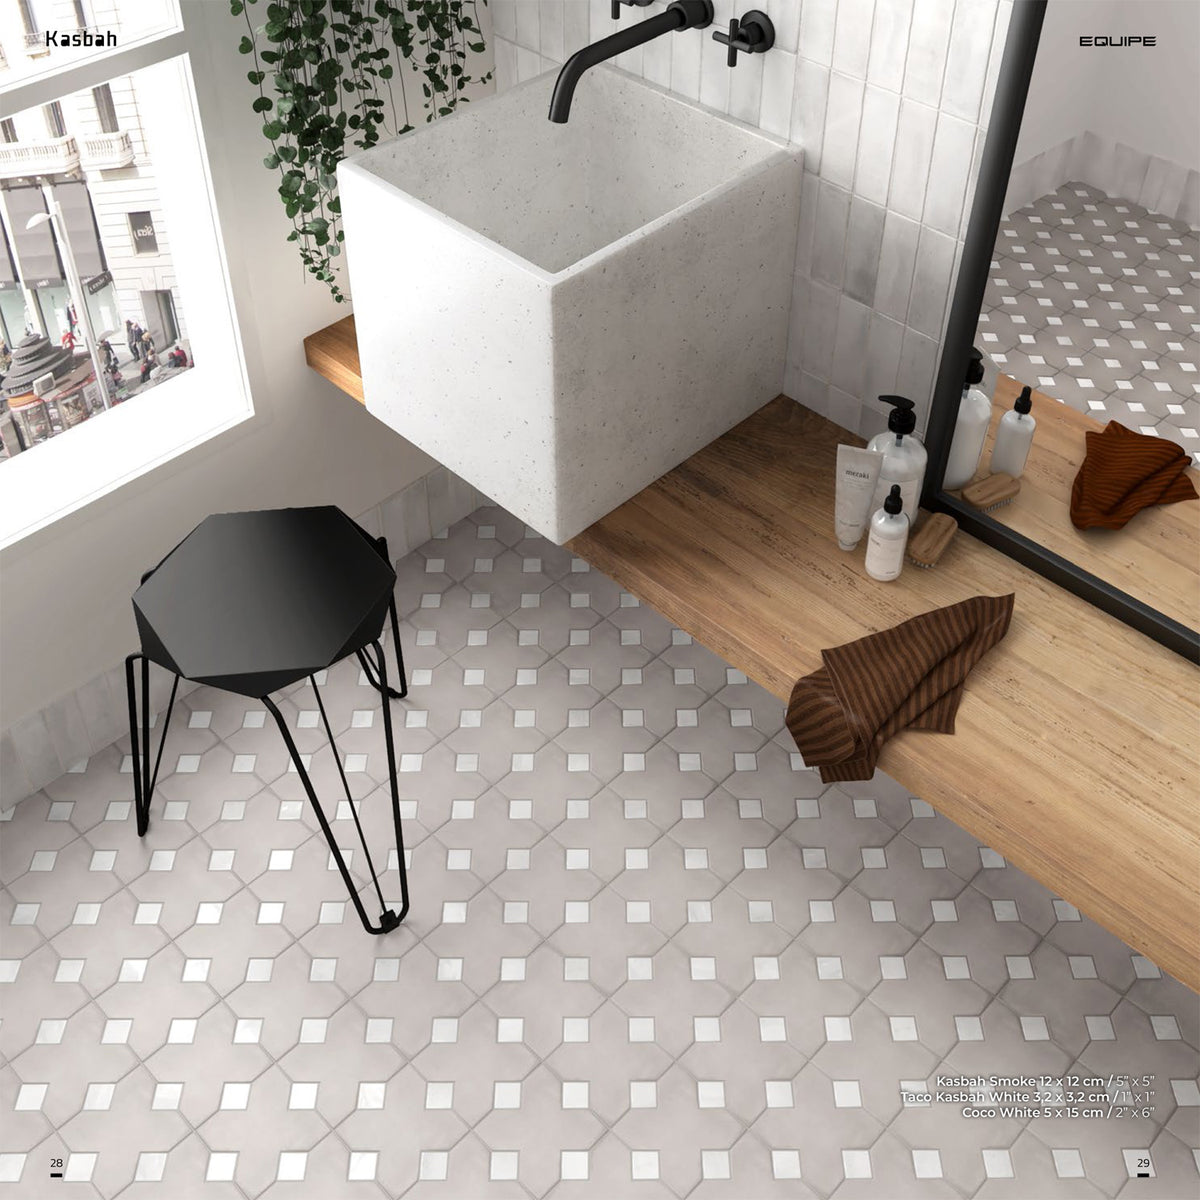 Equipe - Kasbah Collection - 1 in. x 1 in. Porcelain Tile - White Matte Installed